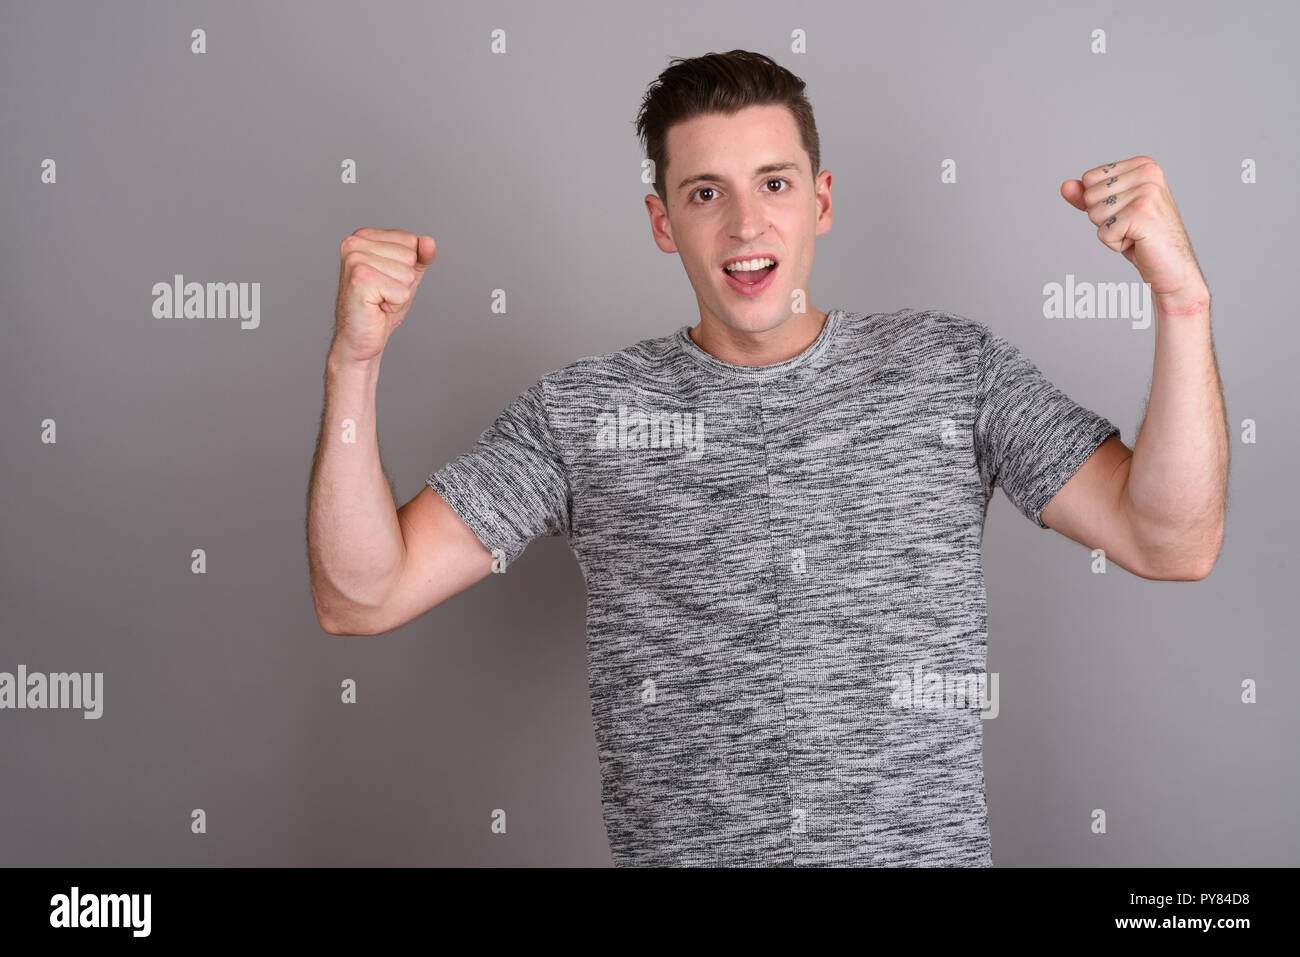 Young handsome man feeling excited with arms raised Stock Photo